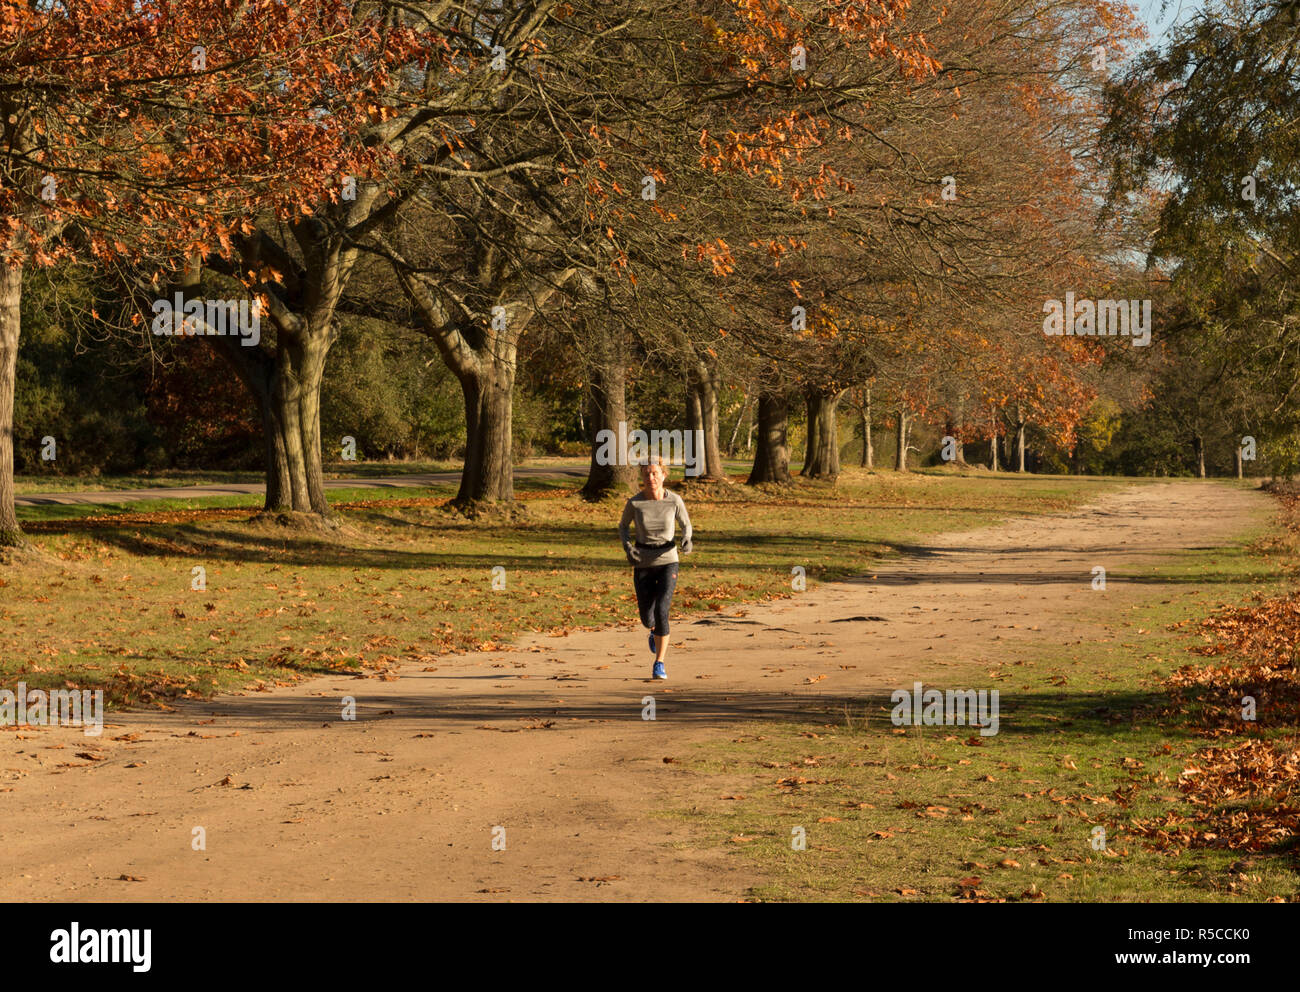 Lady on a morning country jog on a sunny autumn morning, along a path in a park. Autumnal colors on trees Stock Photo